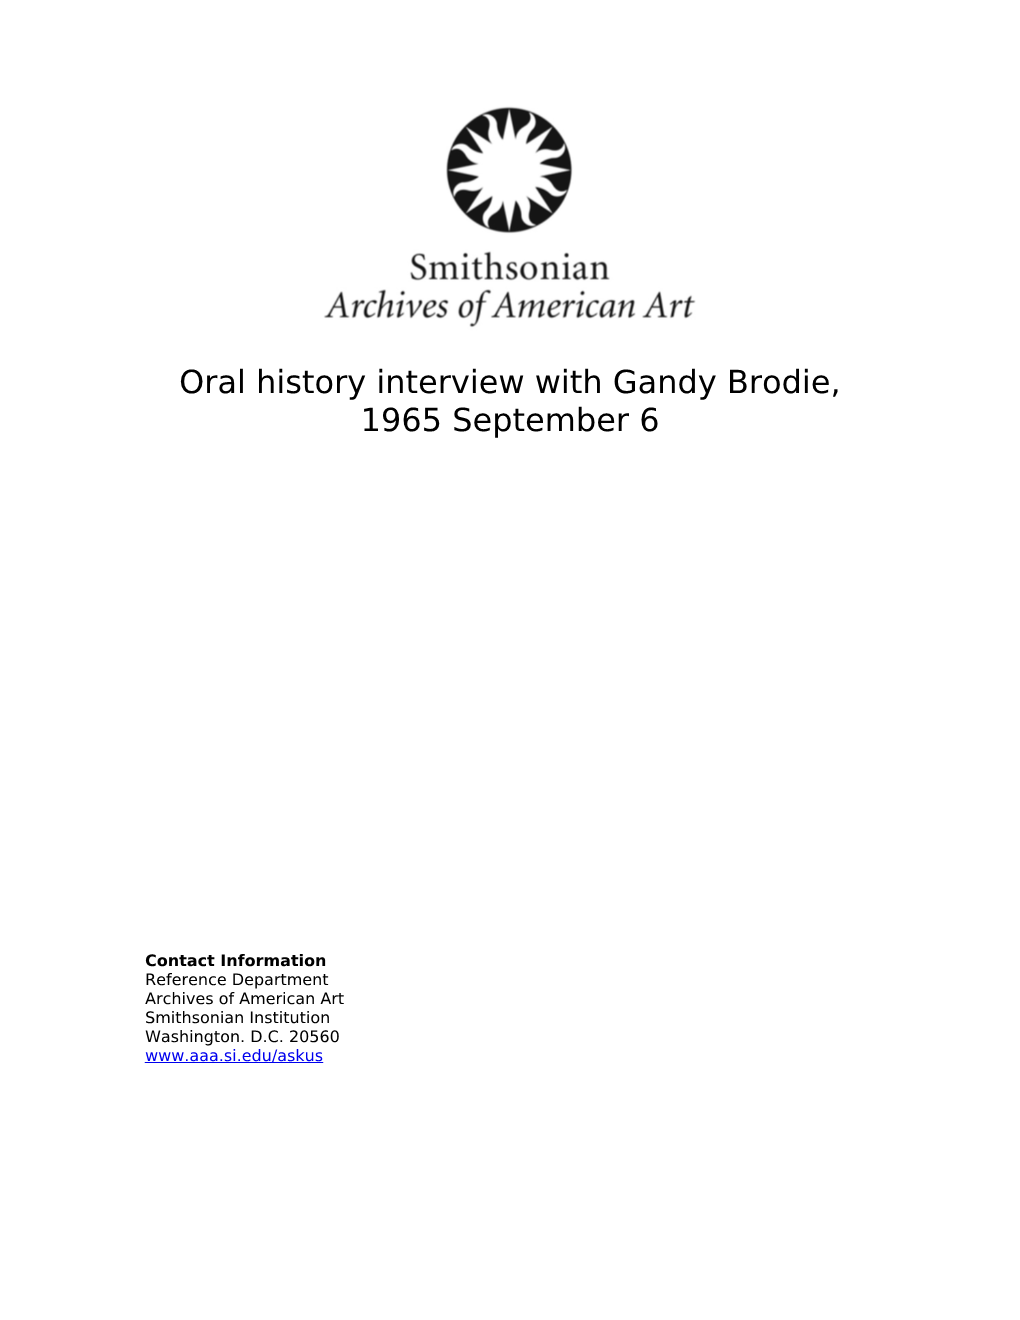 Oral History Interview with Gandy Brodie, 1965 September 6